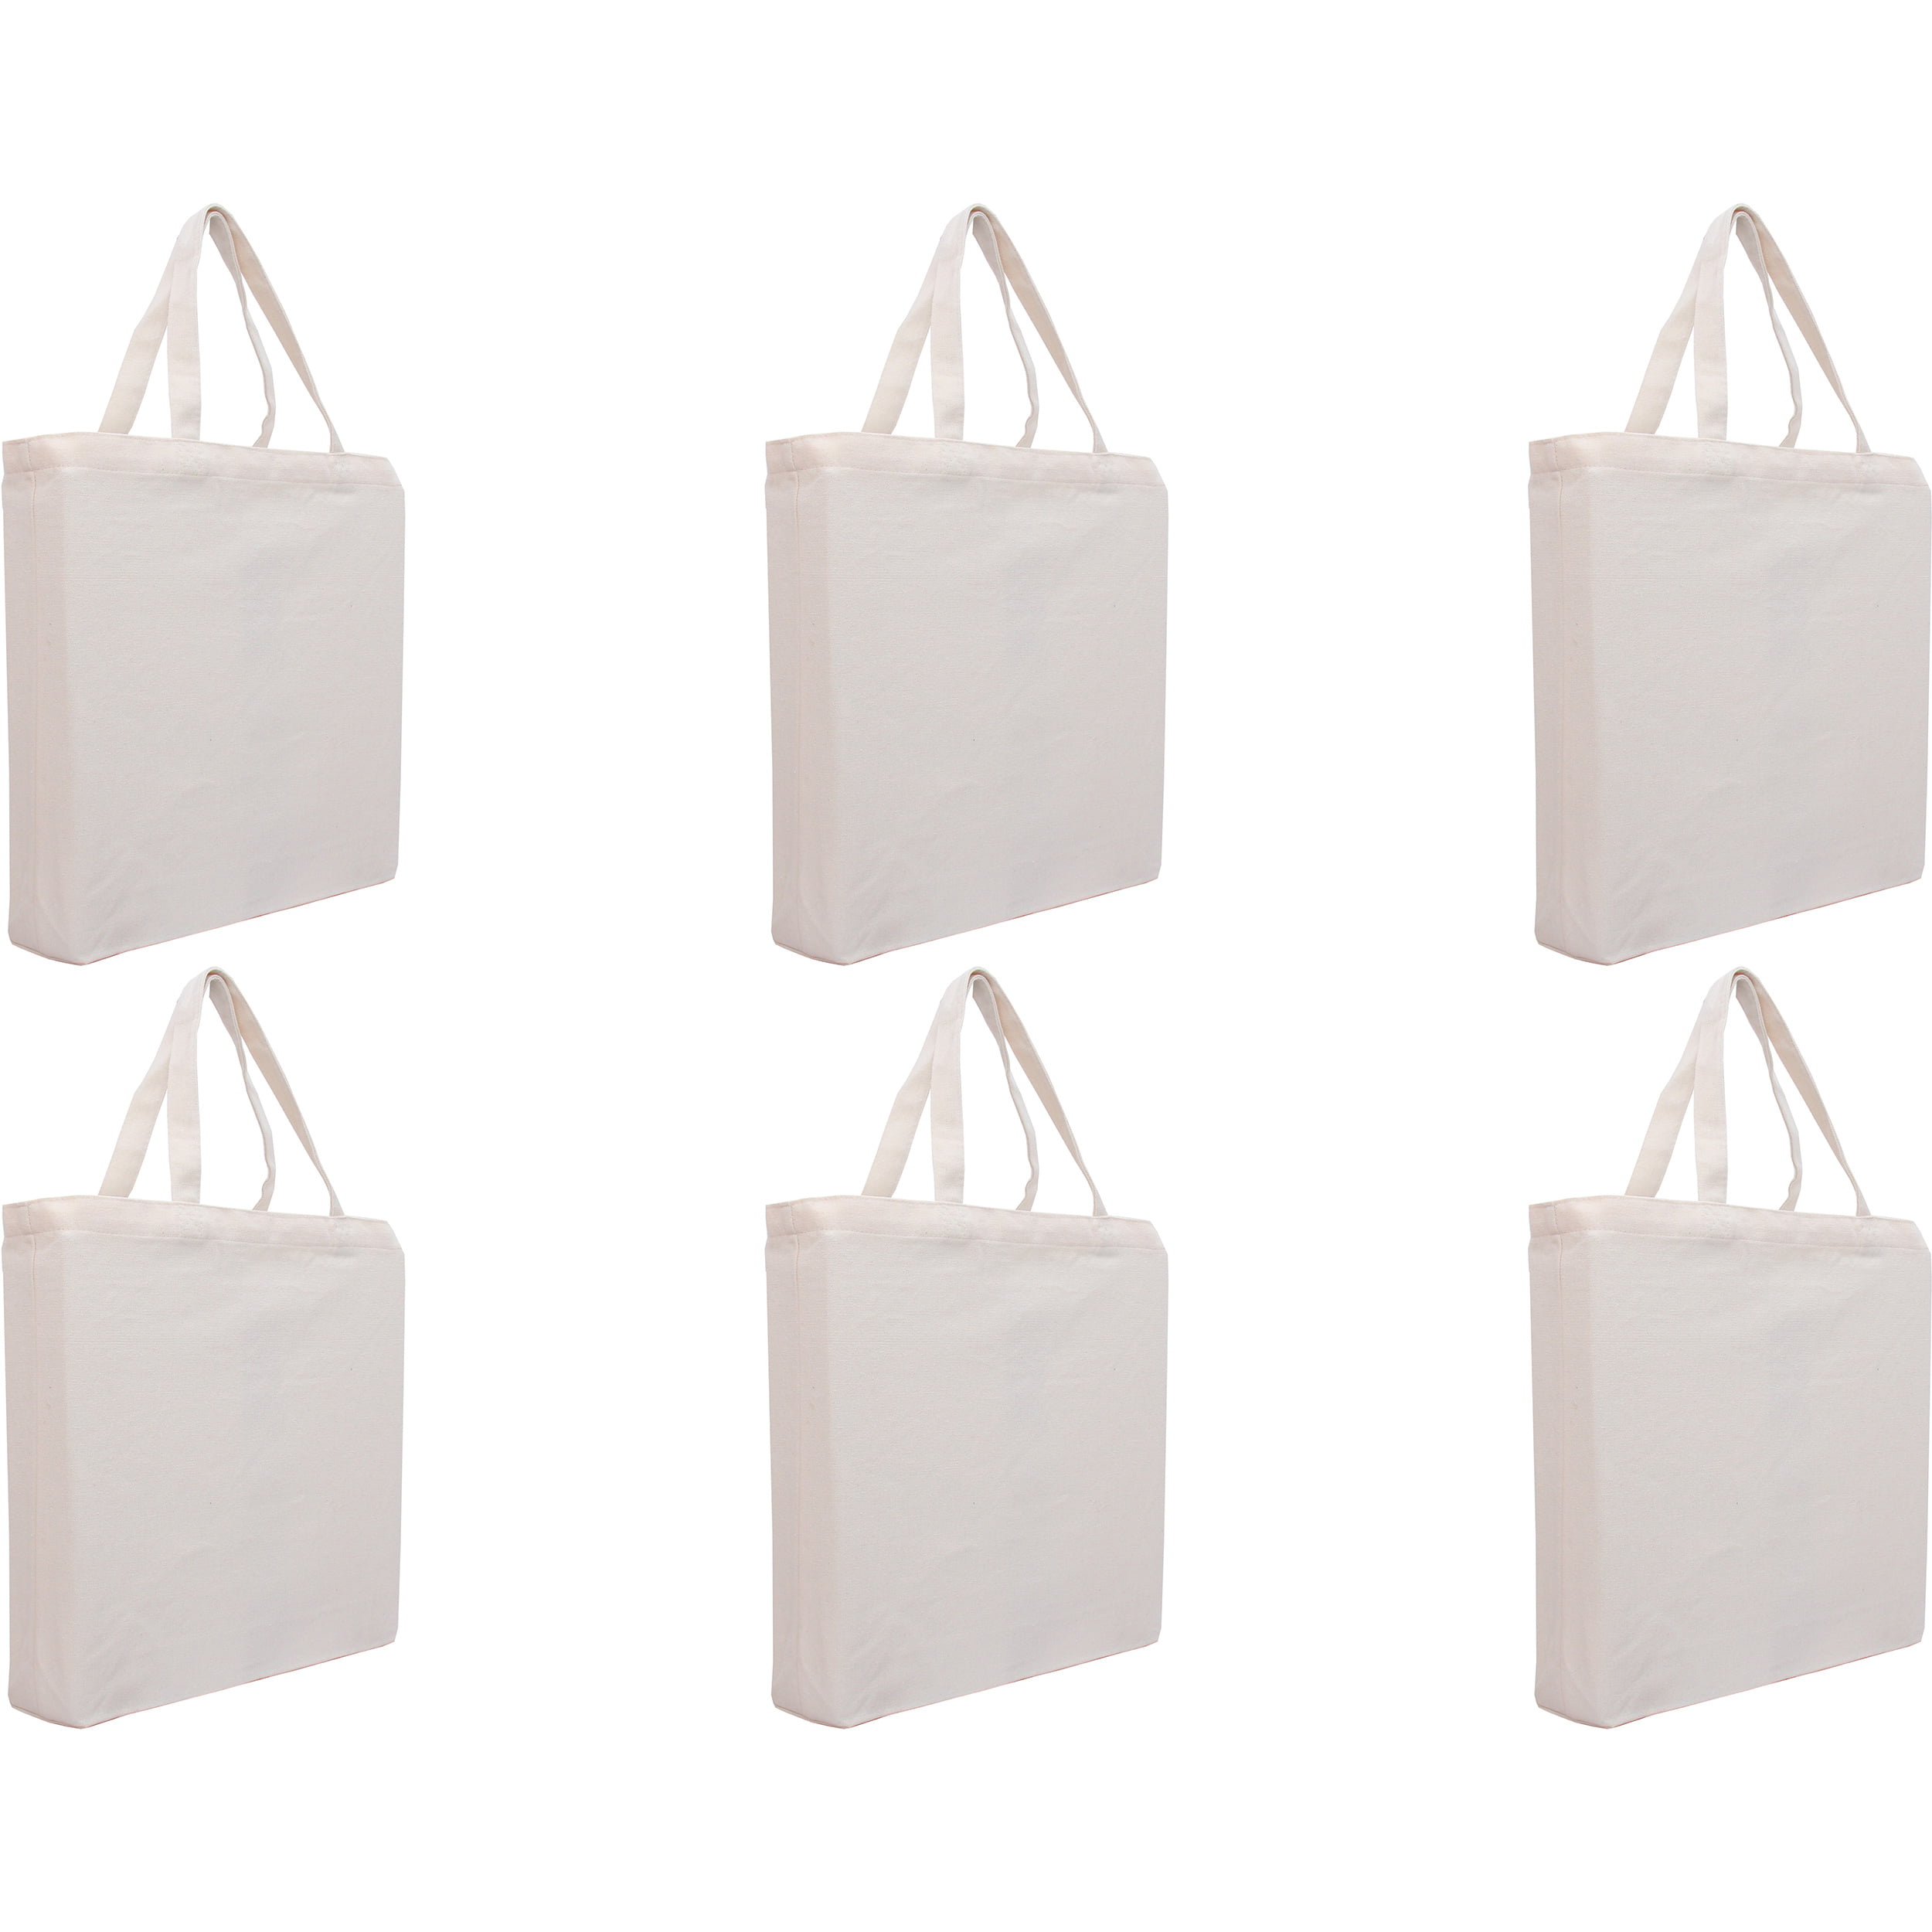 Greenmile Canvas Tote Bags Bulk 15 Pack - 15x16.5 inch - 6 oz - Large Plain Canvas Tote Bags Premium Economical Blank Reusable Grocery Bags, Thick